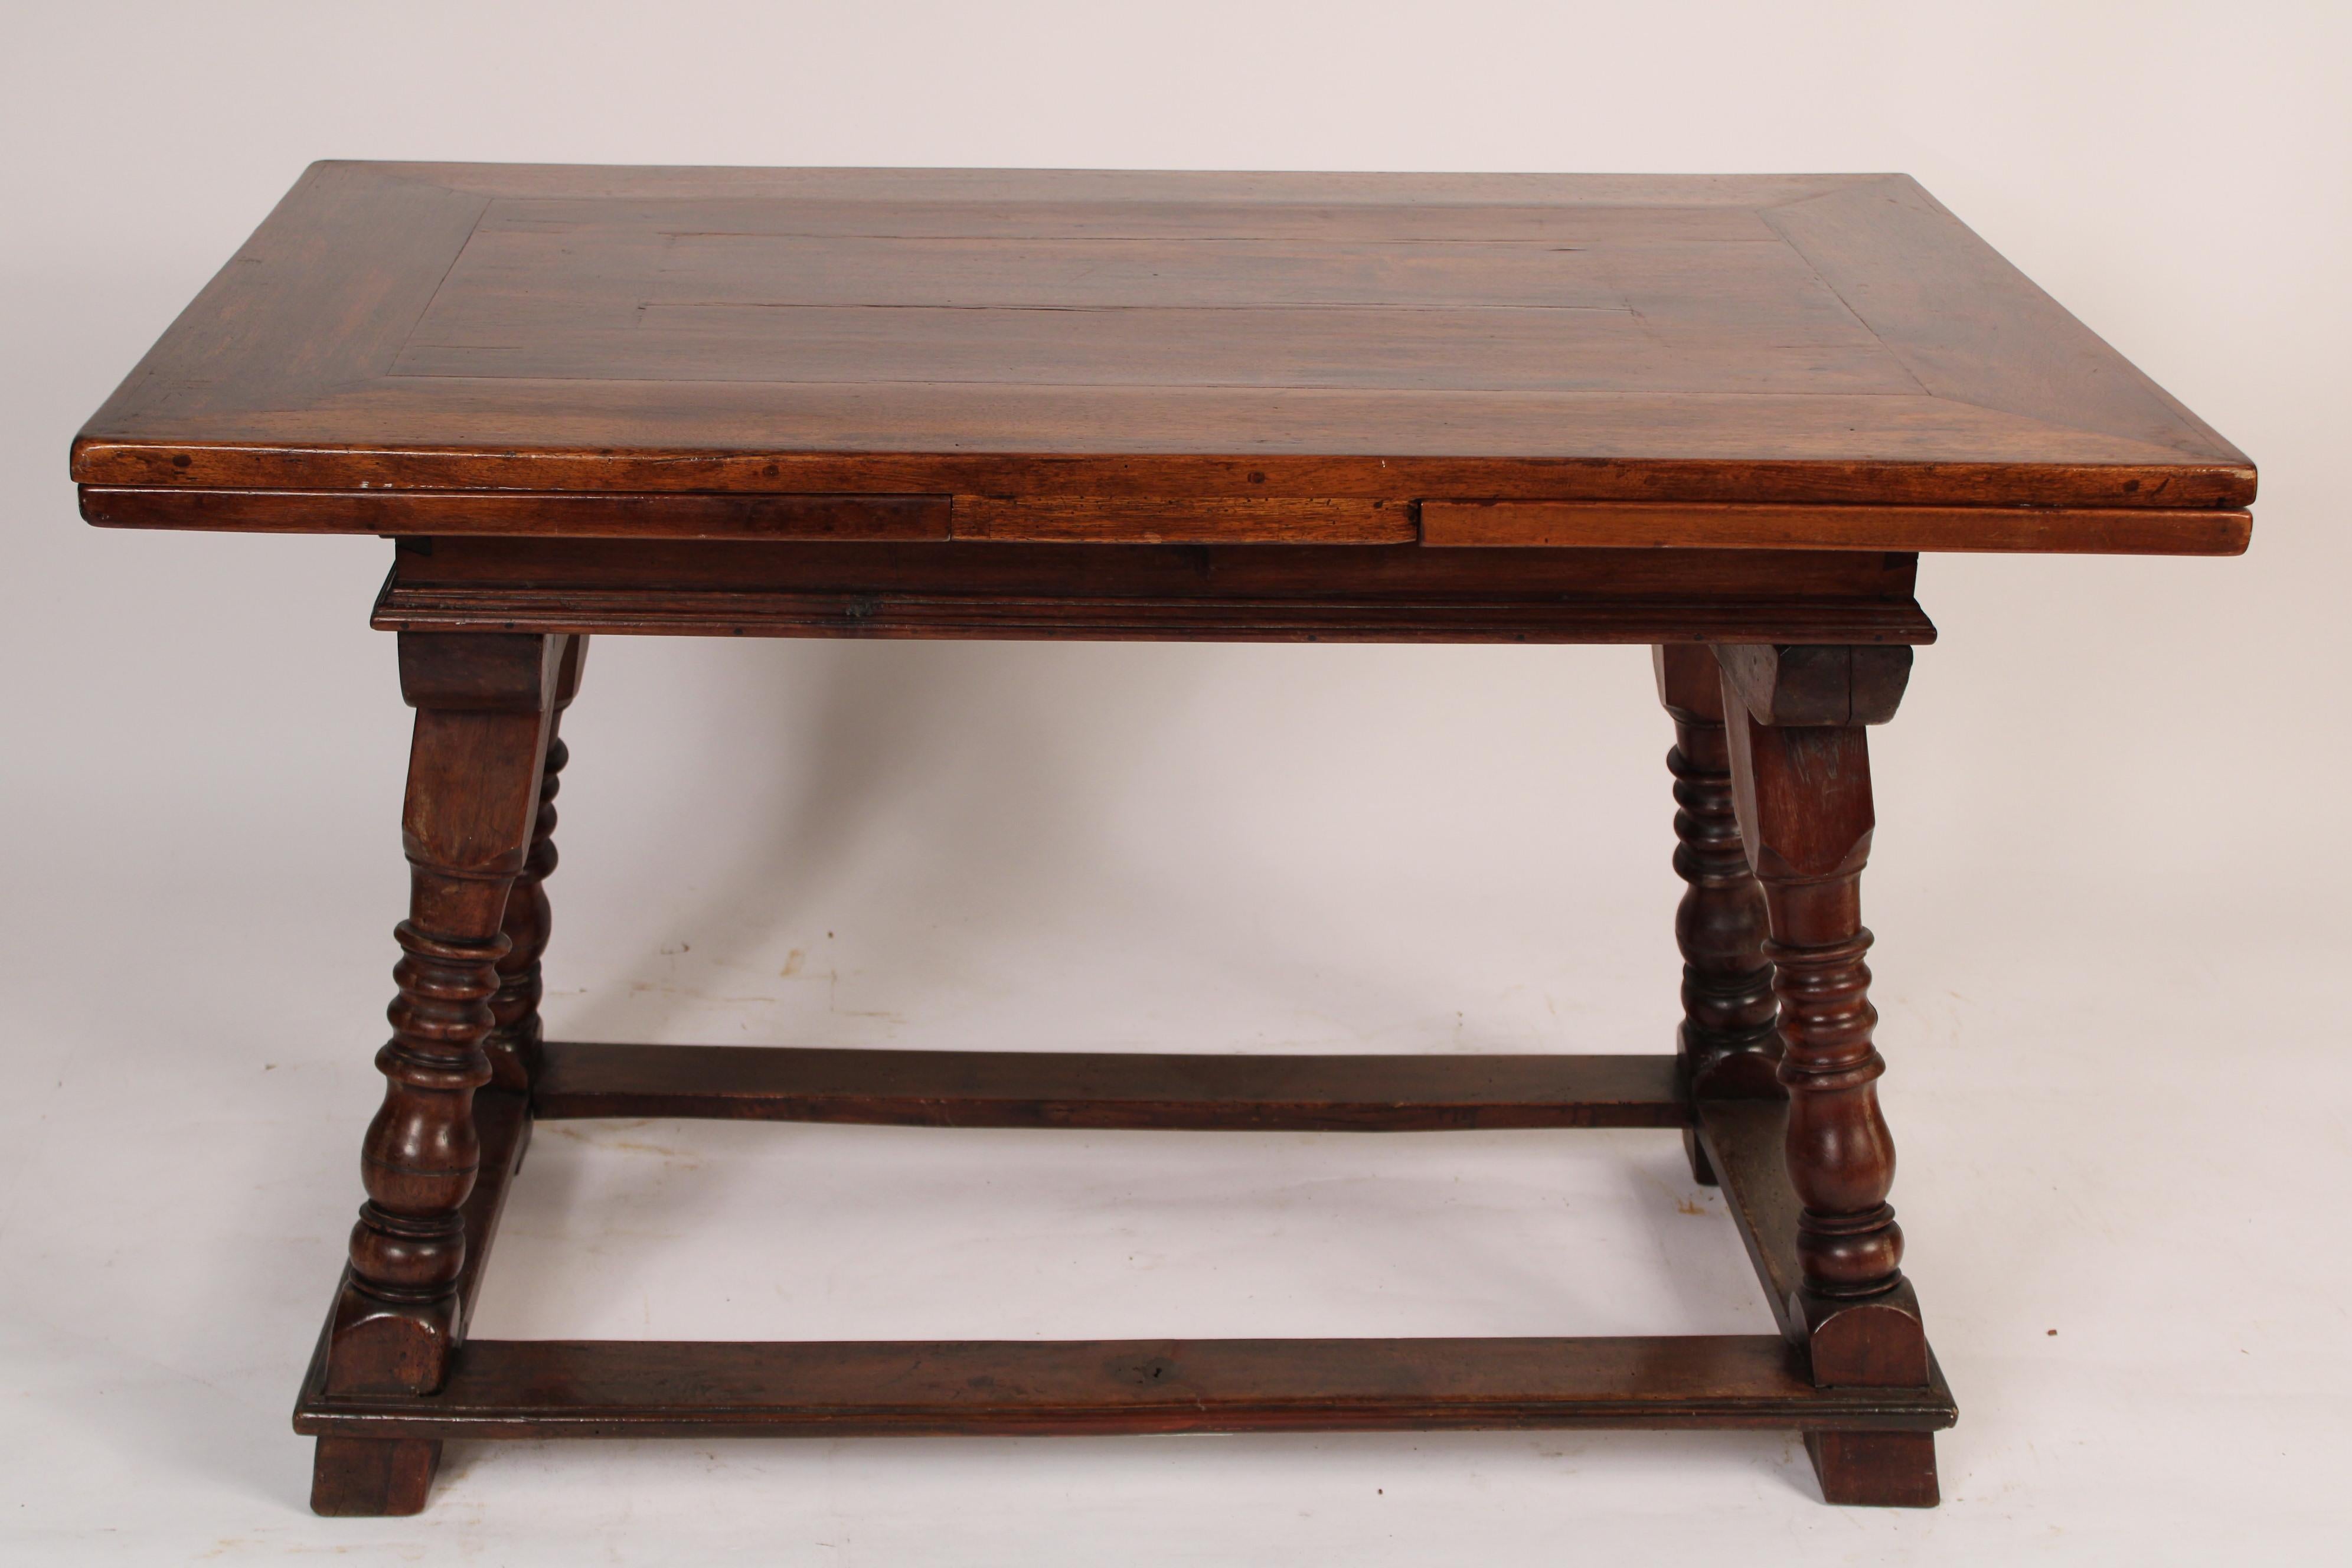 Baroque Antique Continental Walnut Draw Leaf Dining Room Table